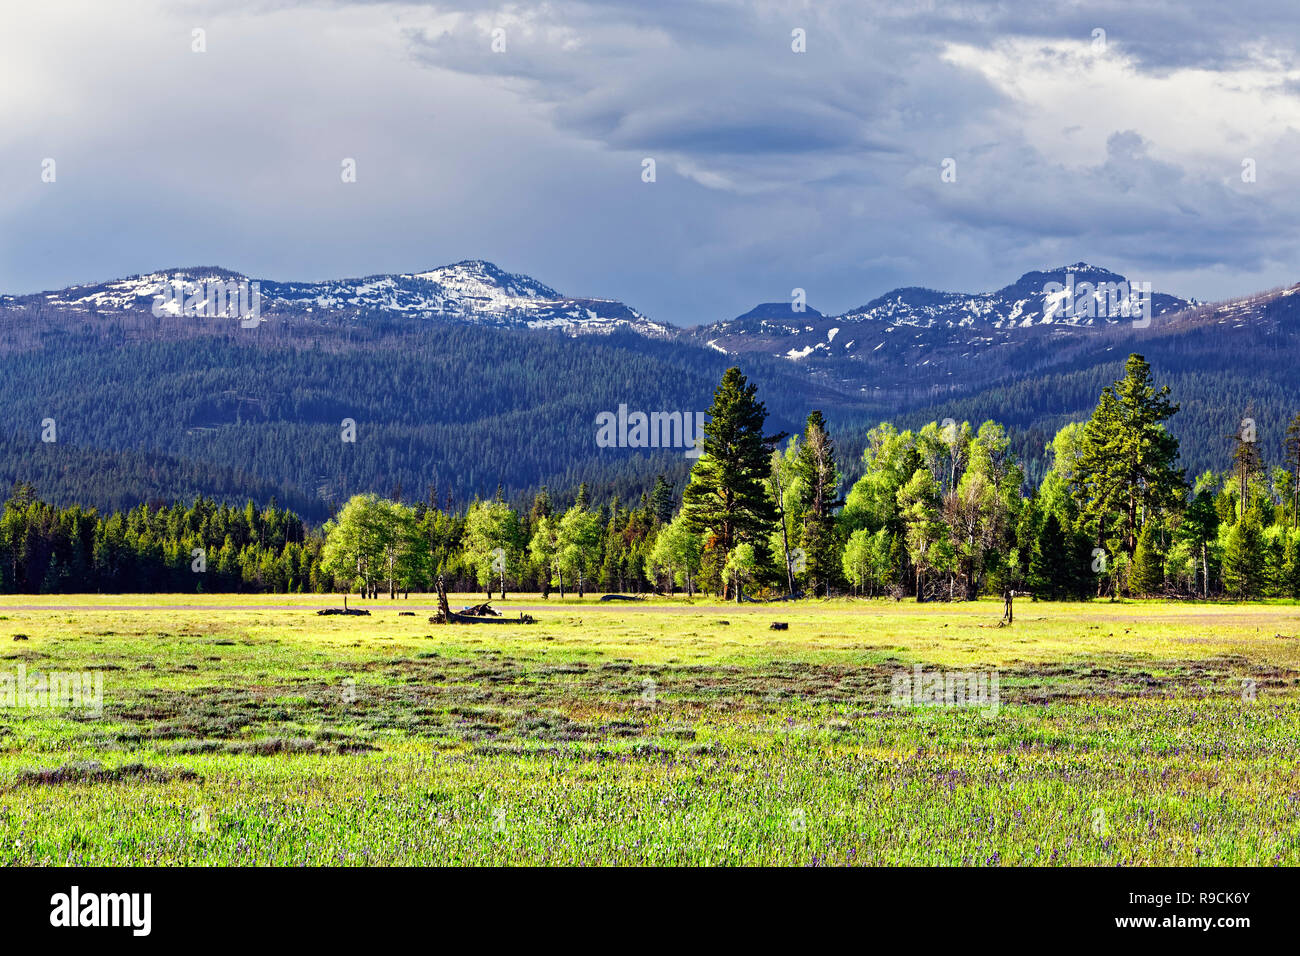 42,894.03585 flat wide lush green Logan’s Valley prairie, beautiful sunshine, mixed trees on edge & snowy mountains in background, central Oregon, USA Stock Photo